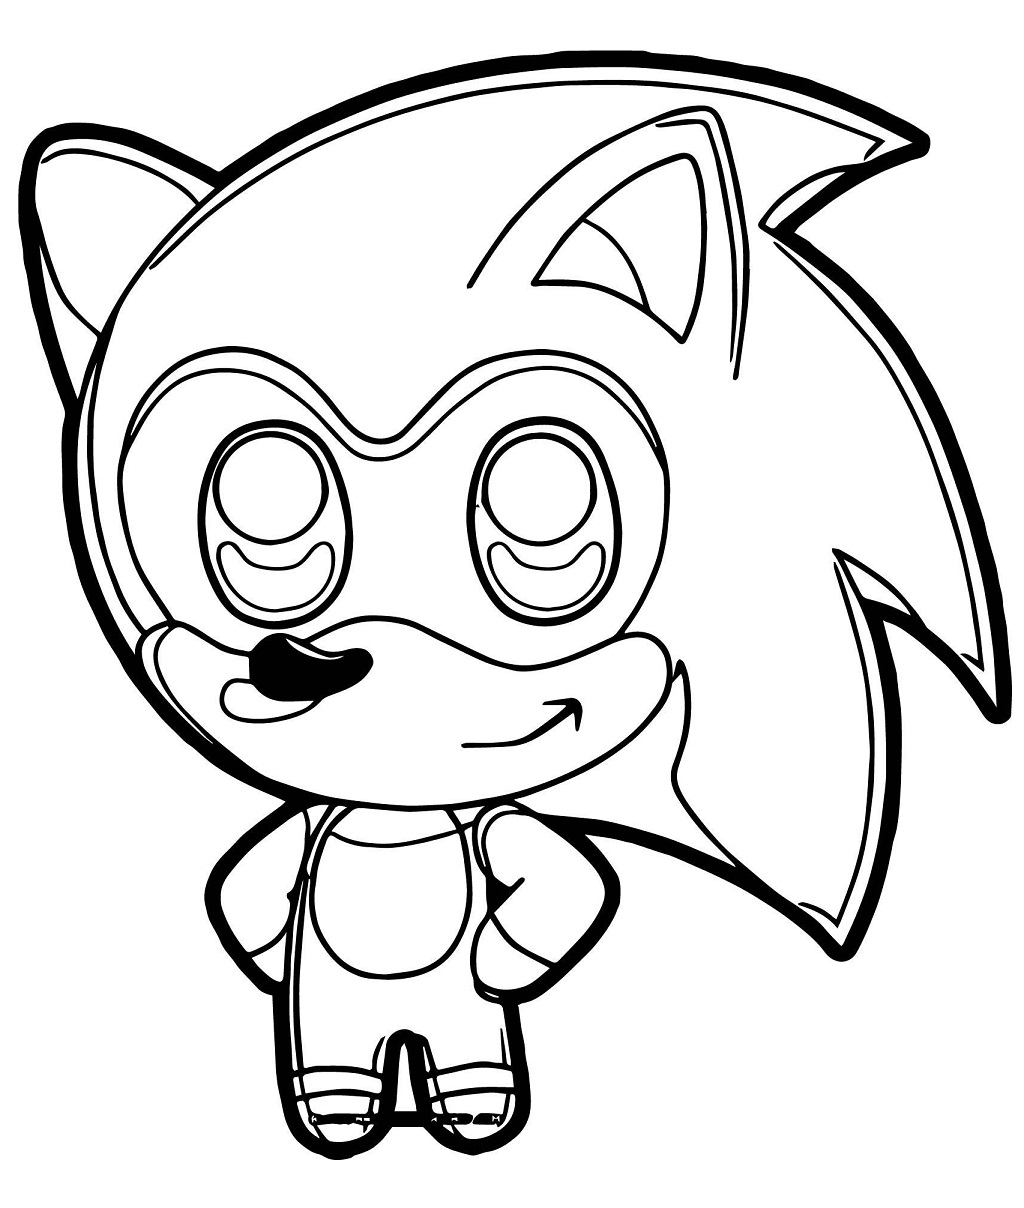 Sonic The Hedgehog Coloring Pages Free condosbytrish